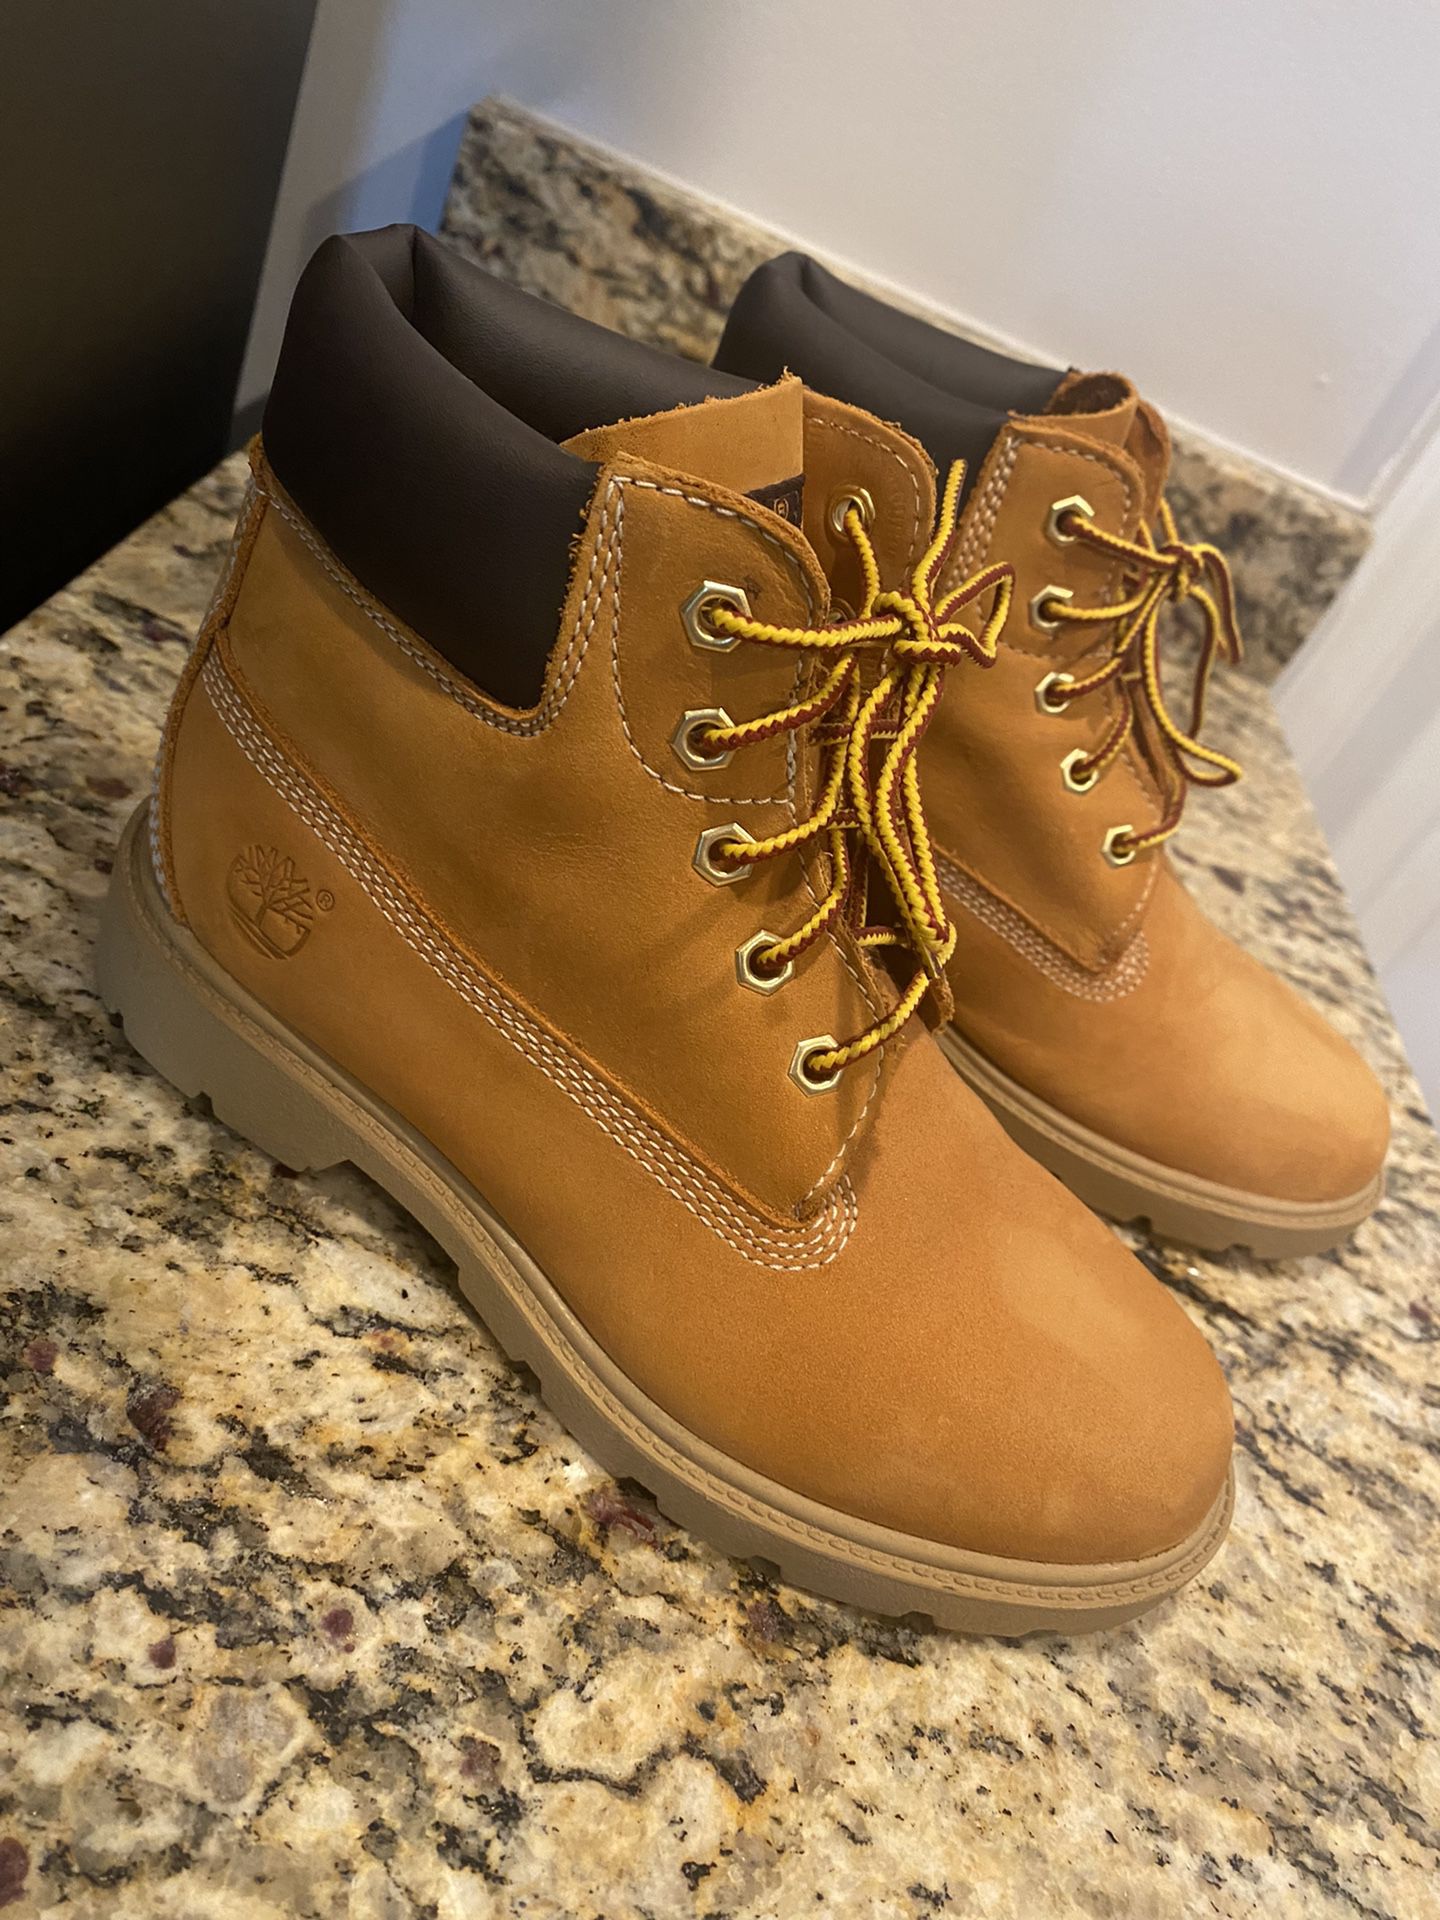 Boys Timberland Boots Size 2 - New 